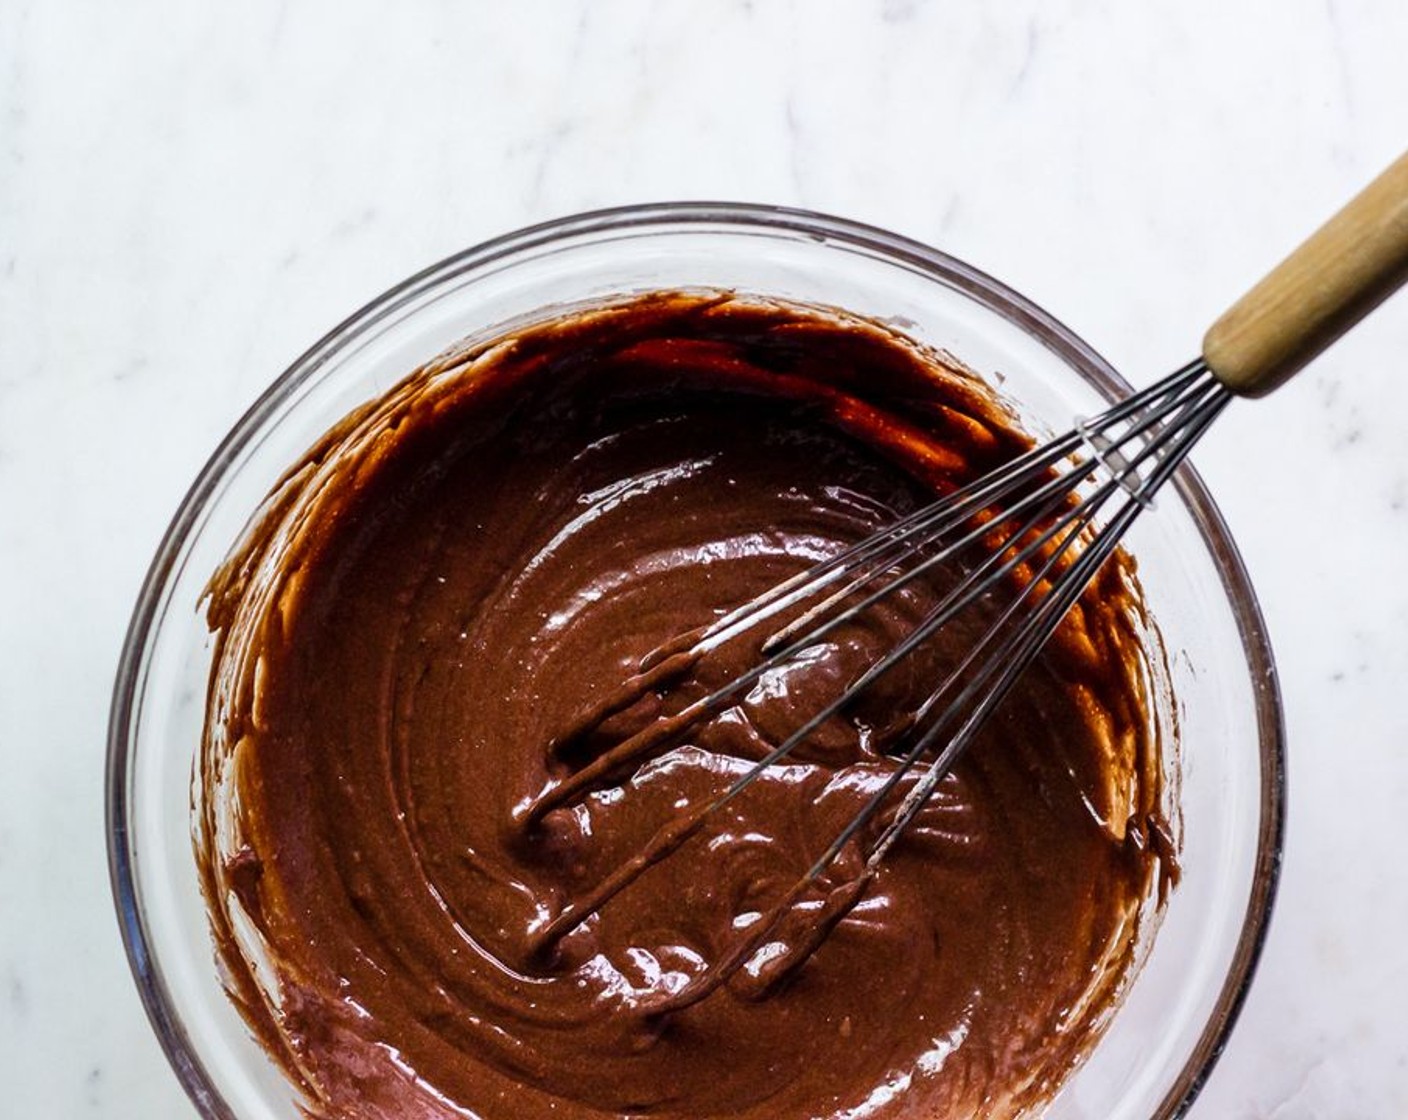 step 5 Whisk in Eggs (2), Vanilla Extract (1 tsp), Sweet Glutinous Rice Flour (1/2 cup), Tapioca Starch (1/2 Tbsp), Unsweetened Cocoa Powder (1/2 Tbsp), and Salt (1/4 tsp). Mix until well combined.